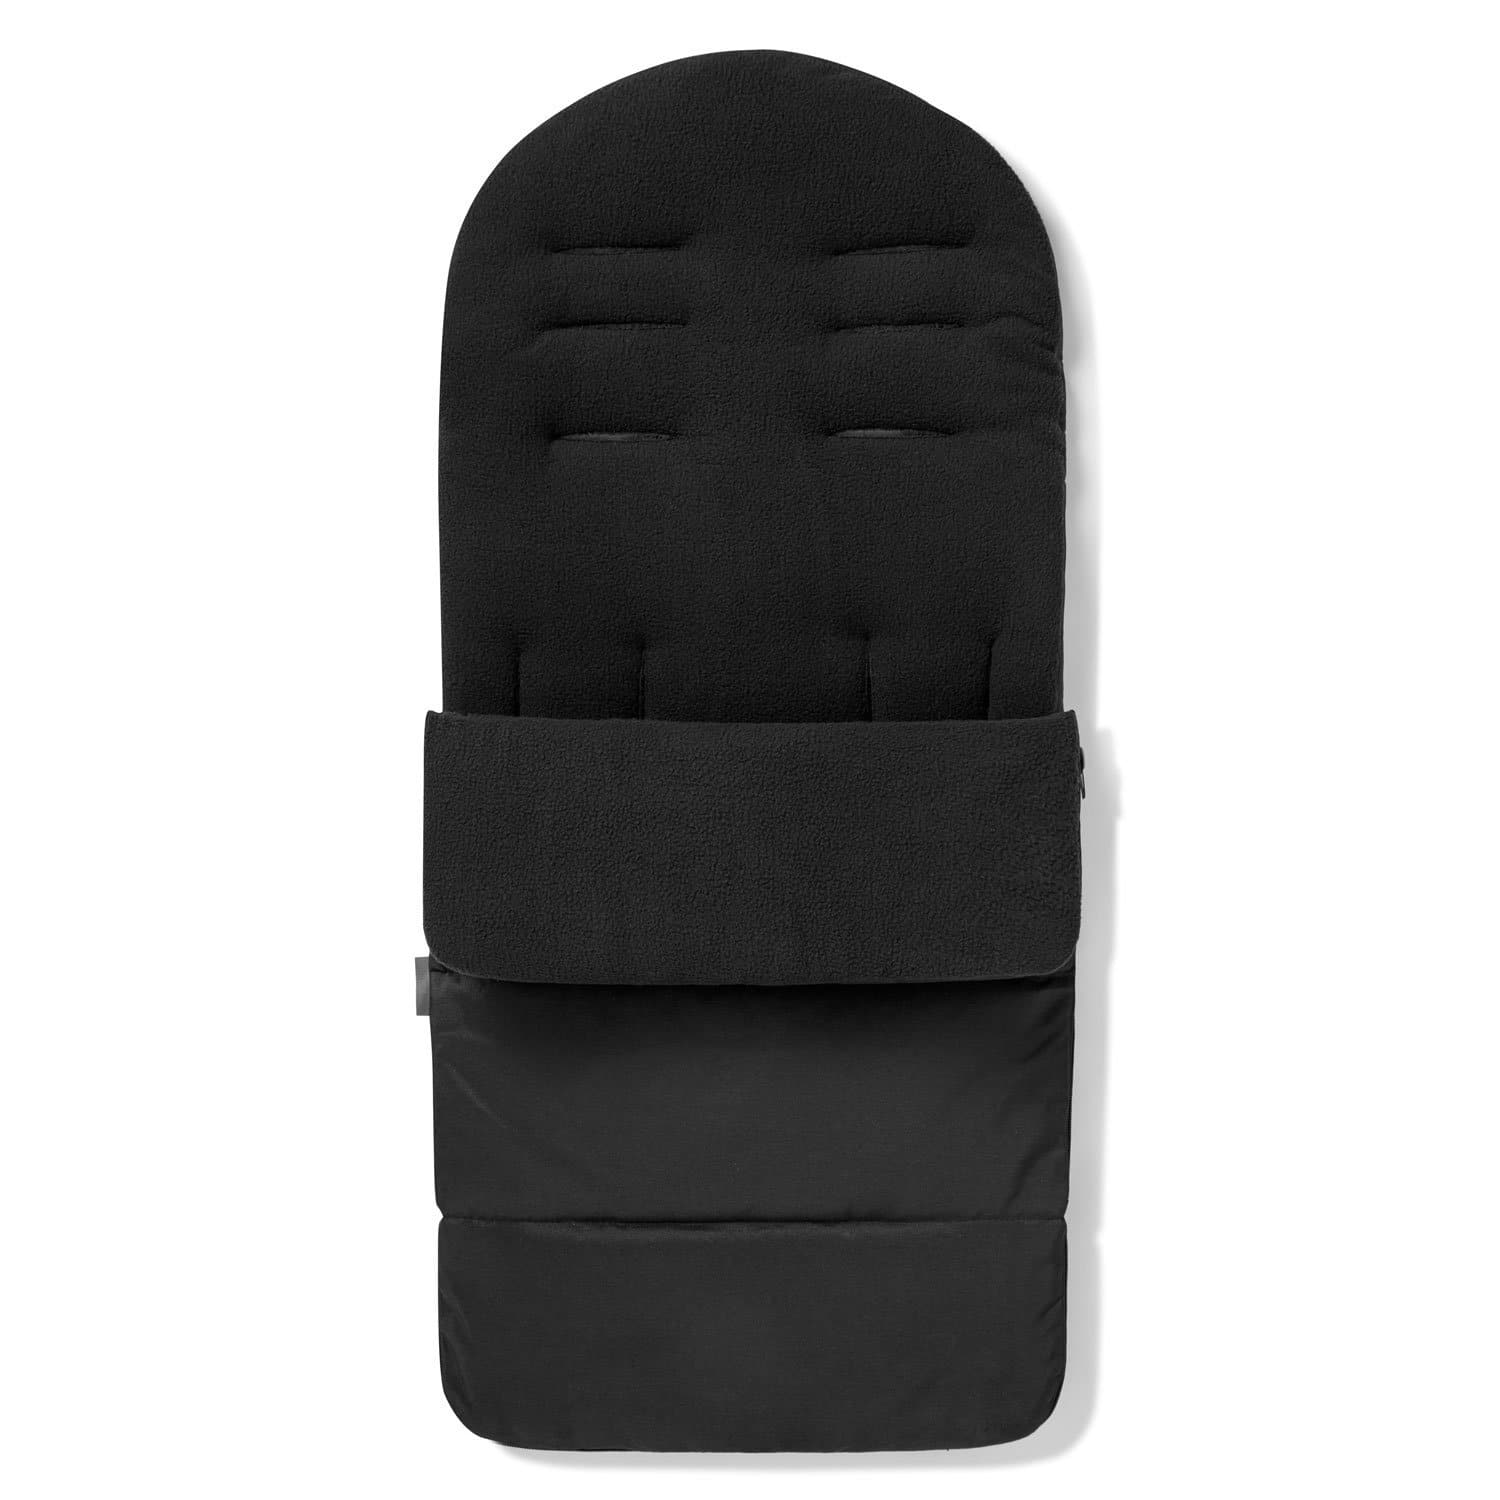 Premium Footmuff / Cosy Toes Compatible with Peg Perego - Black Jack / Fits All Models | For Your Little One